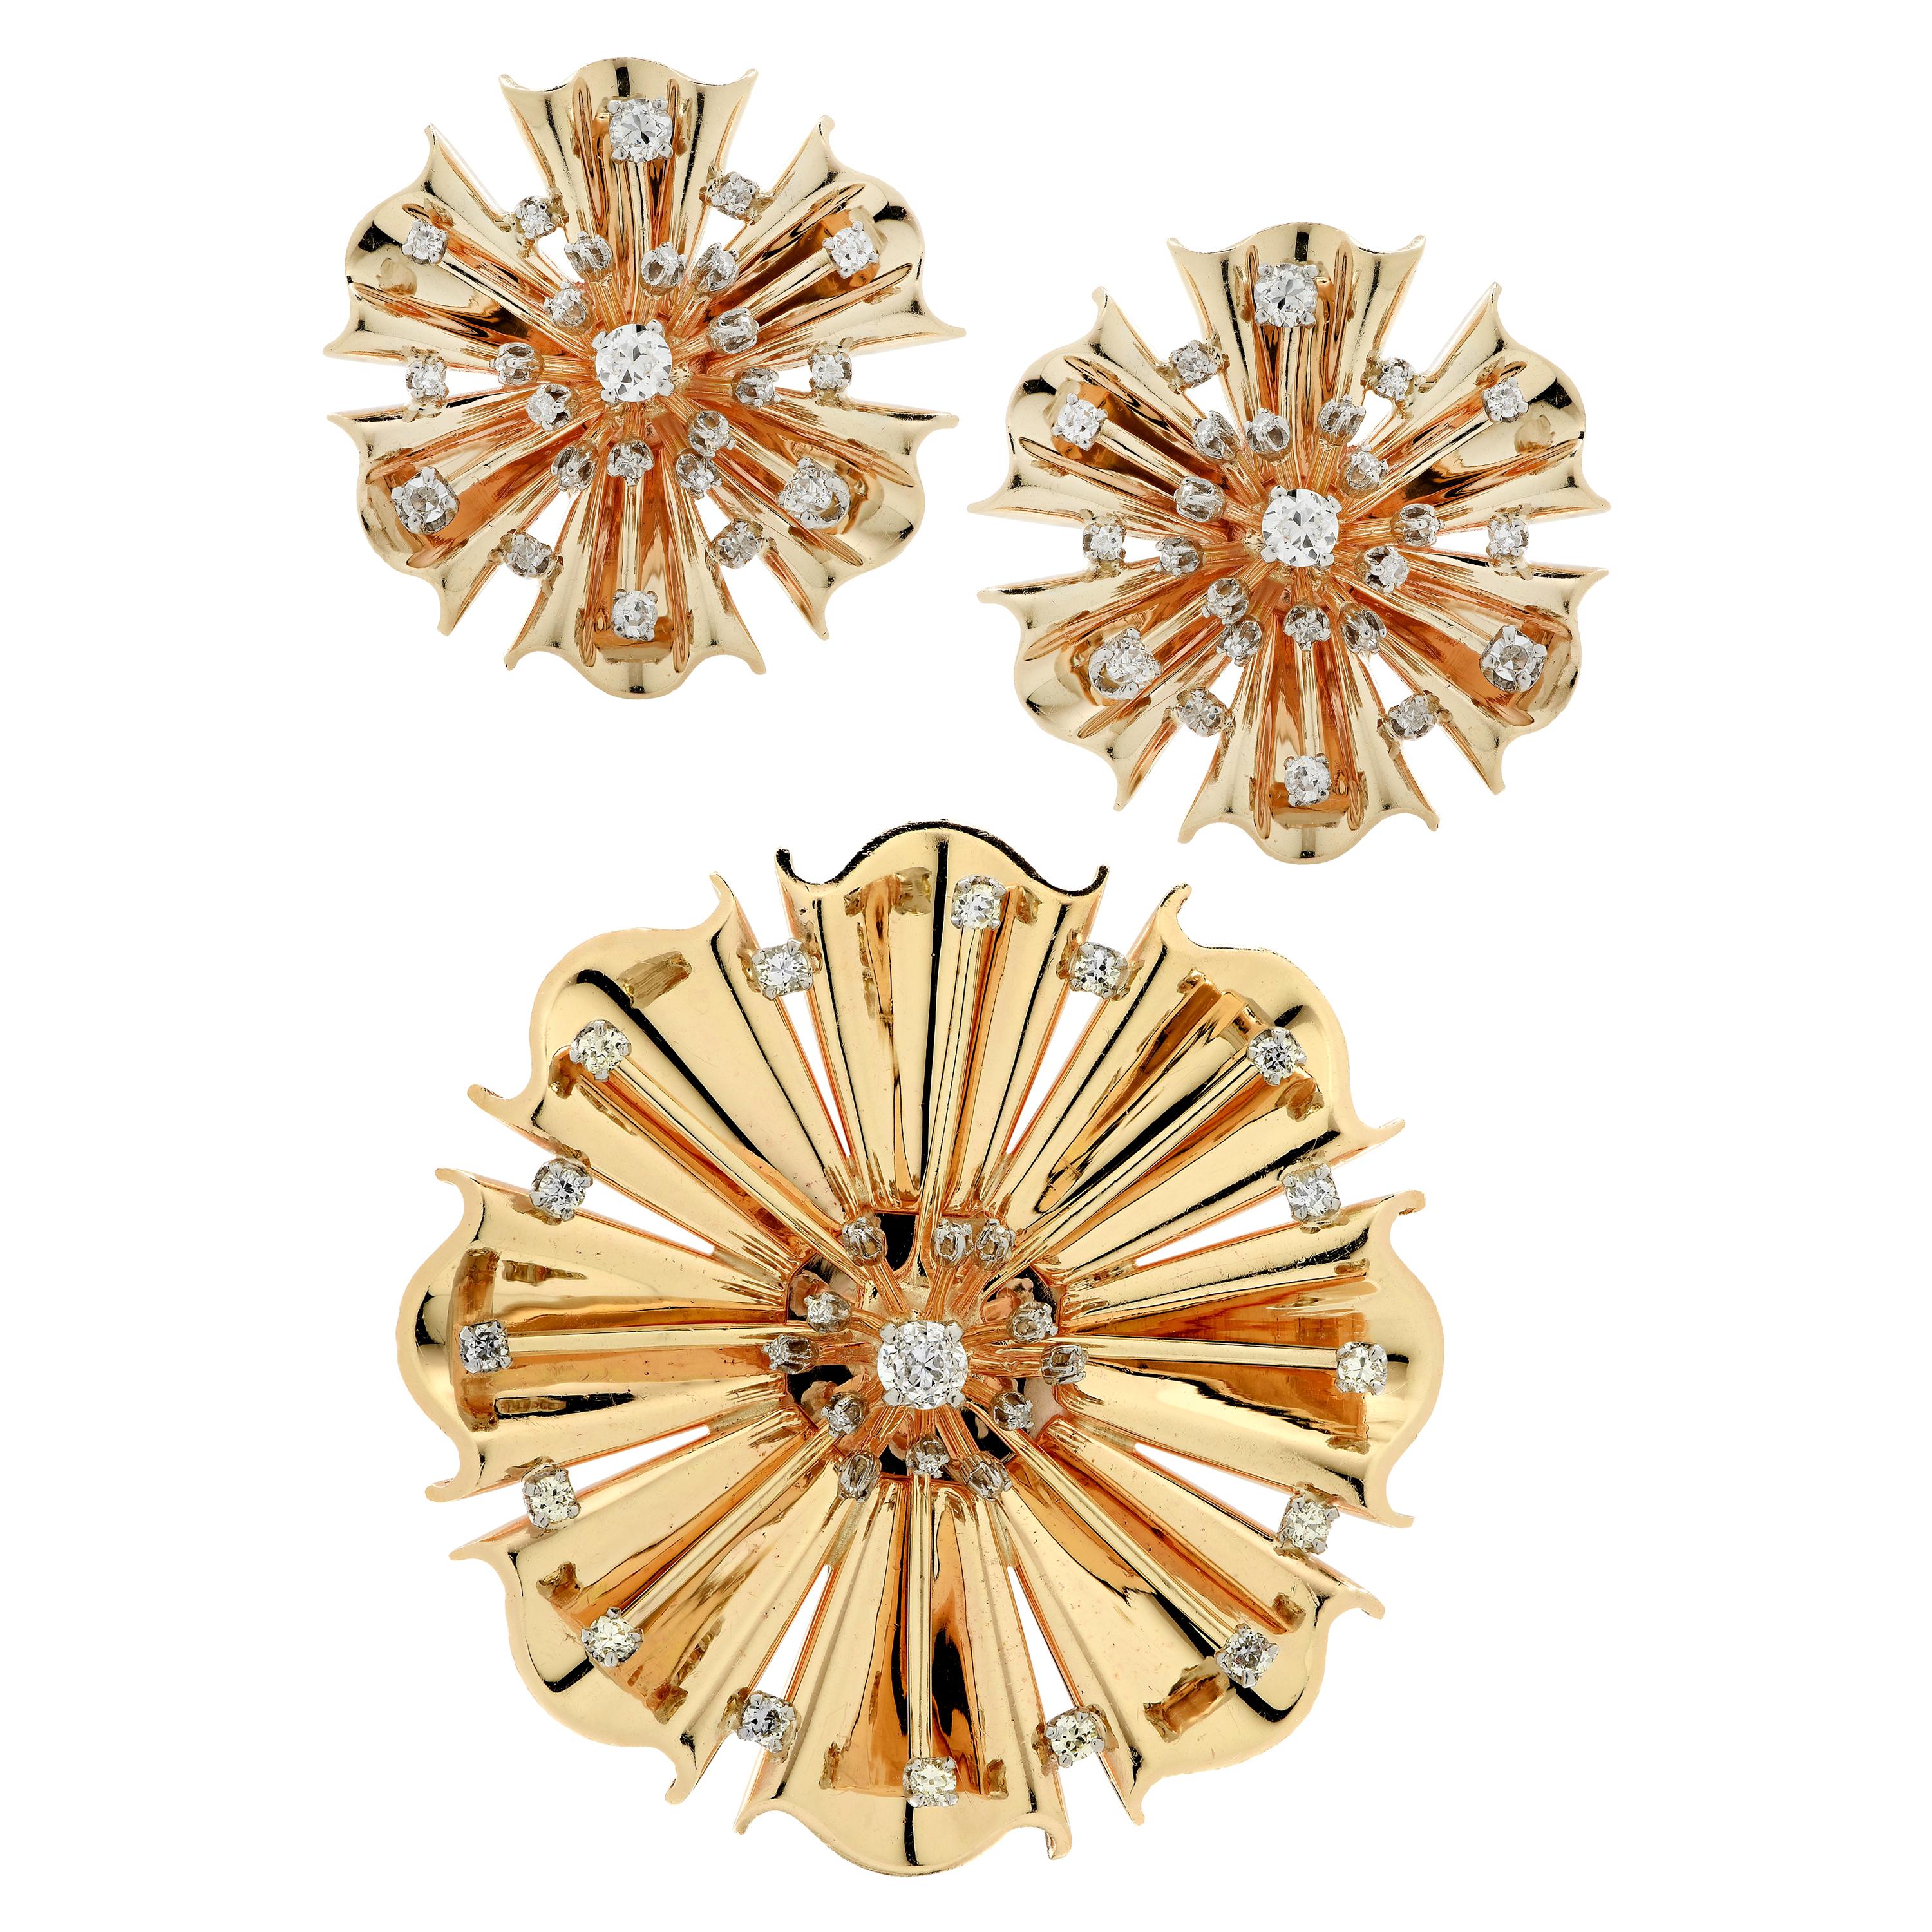 Retro Diamond and Gold Flower Brooch Pendant and Earring Set